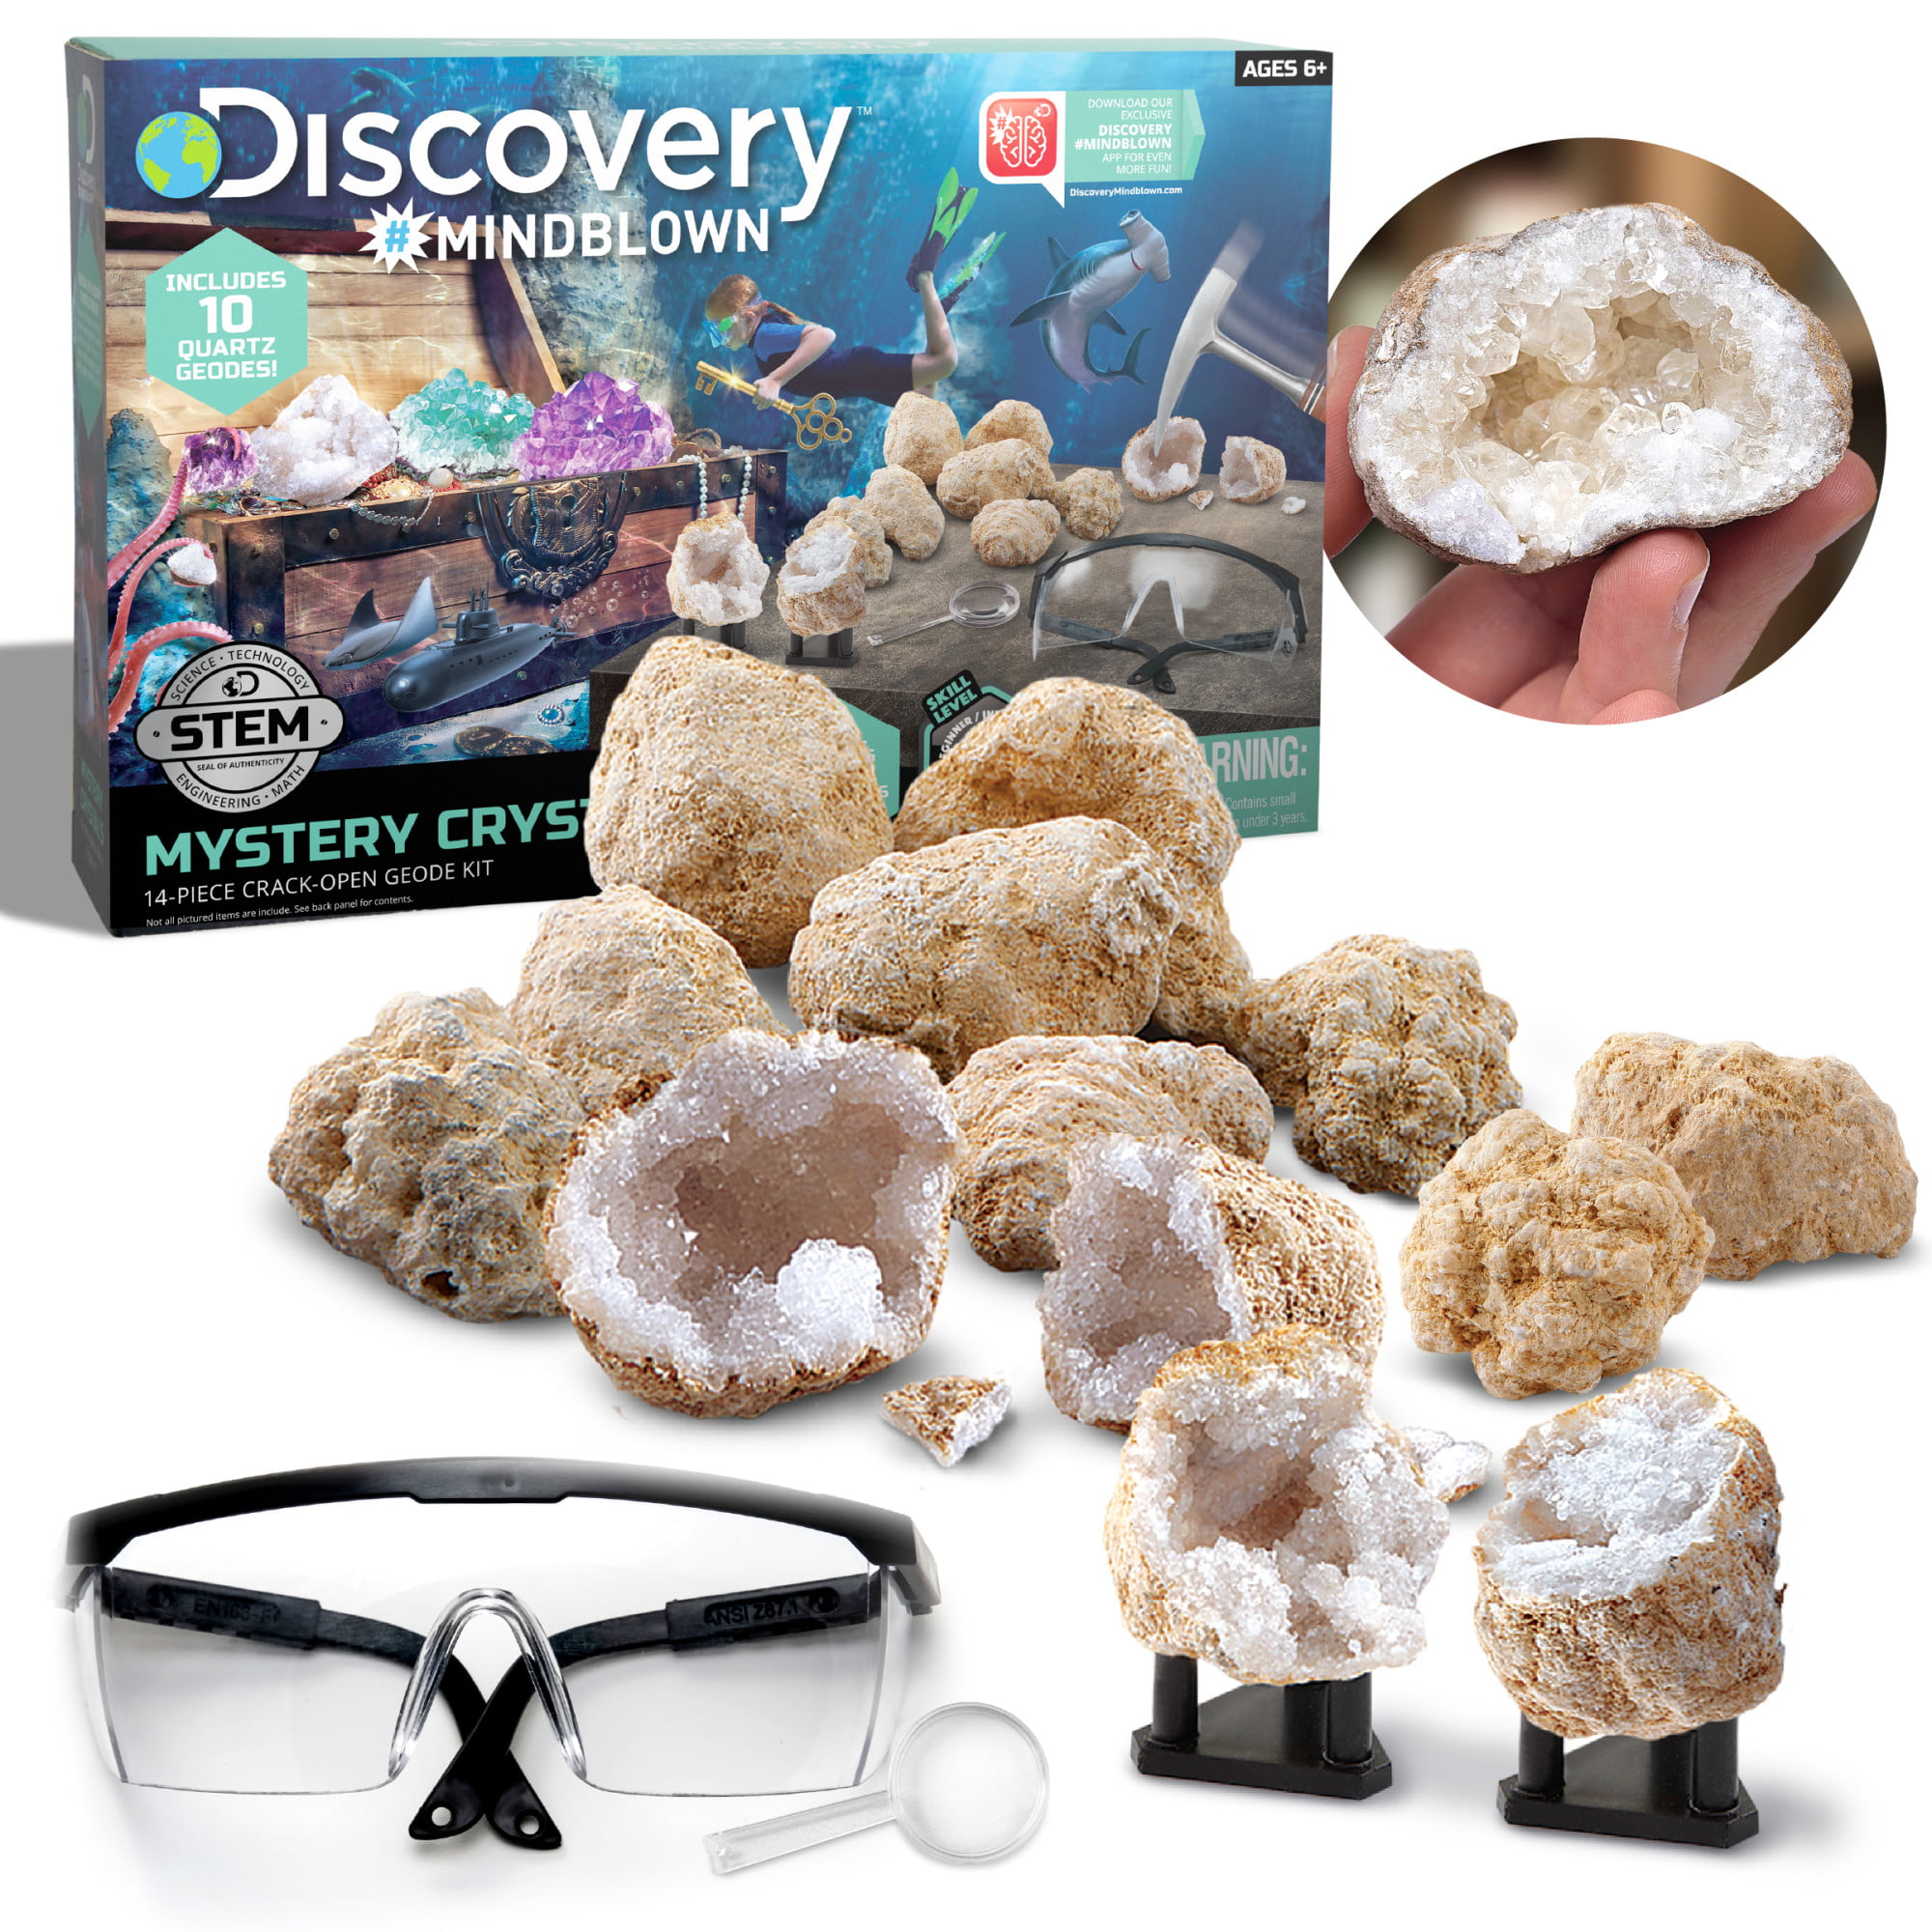 TOP QUALITY! NATIONAL GEOGRAPHIC Break Open 10 Geodes 